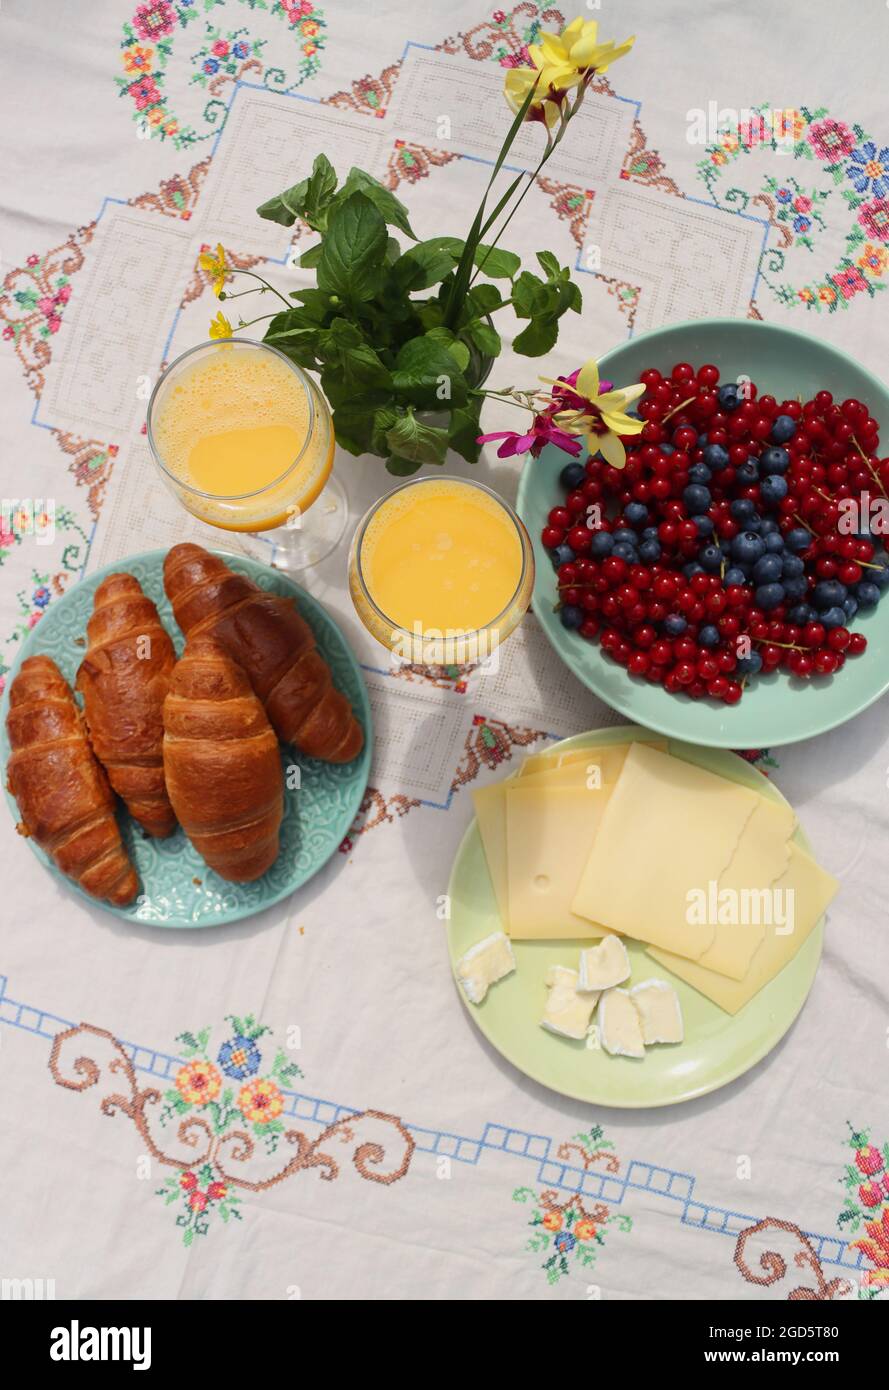 Breakfast on a table. Freshly baked croissants, cheese, red current, blue berries and two glasses of orange juice. Healthy eating concept Stock Photo